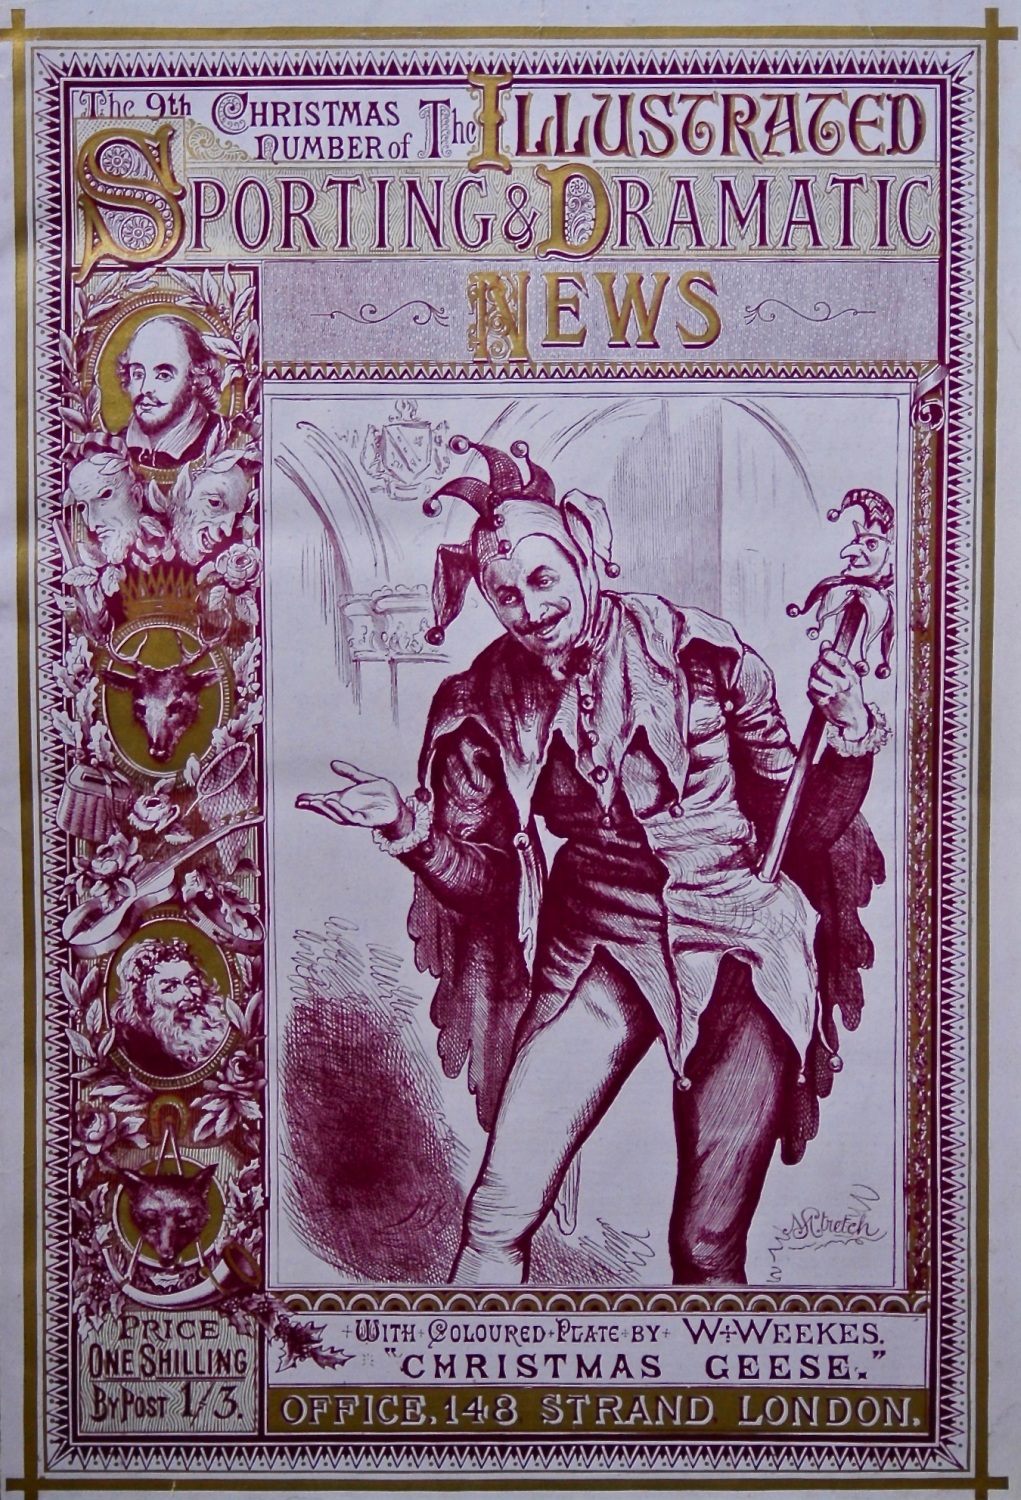 9th, Christmas Number of the Illustrated Sporting and Dramatic News, Decemb